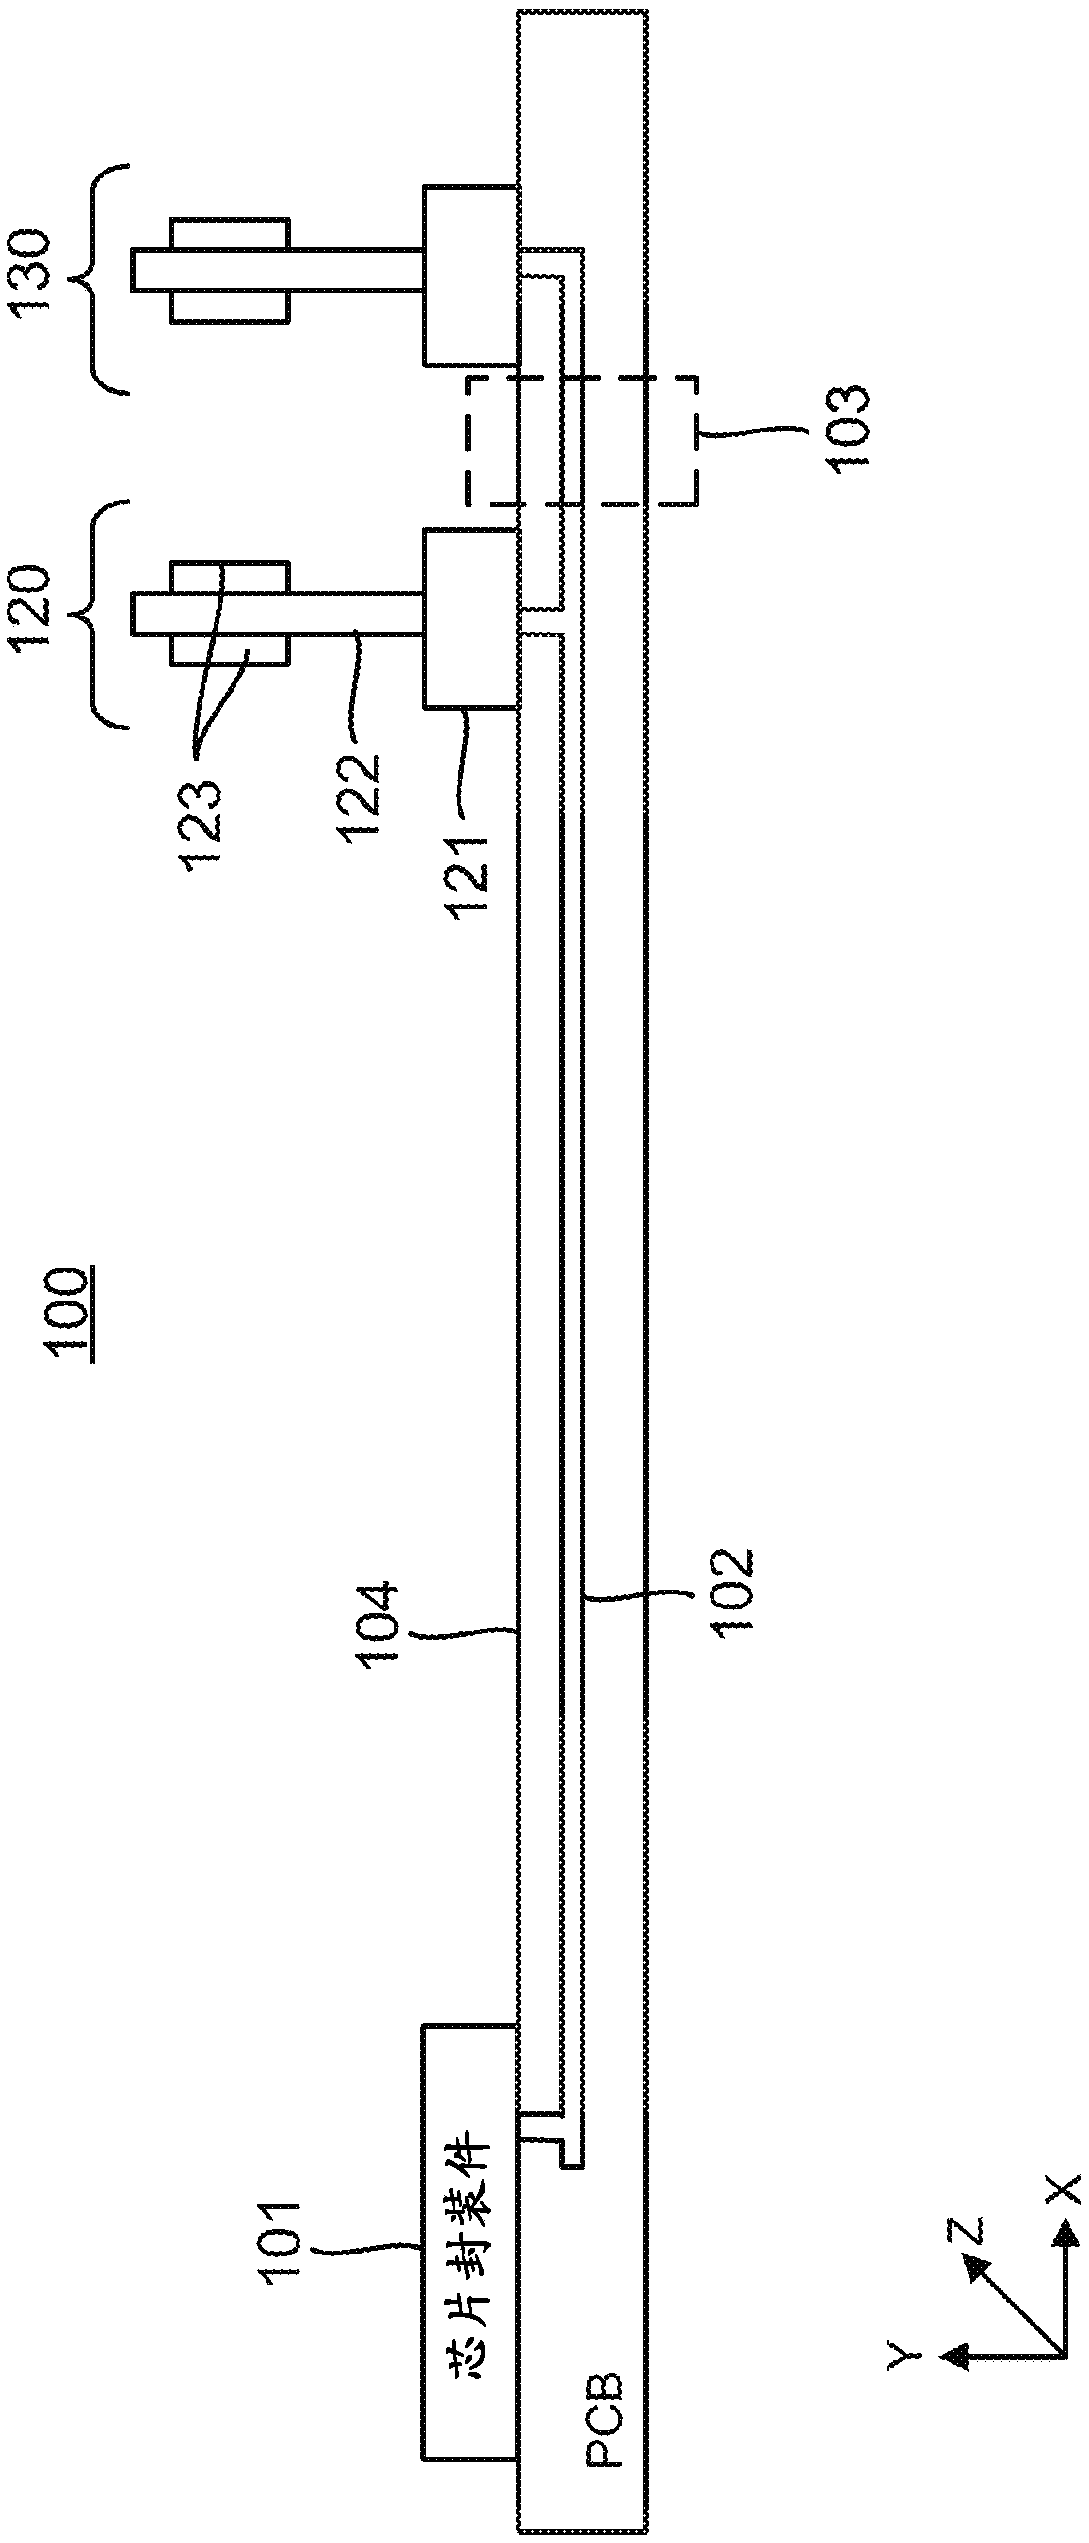 Circuits and methods providing electronic band gap (EBG) structures at memory module electrical coupling